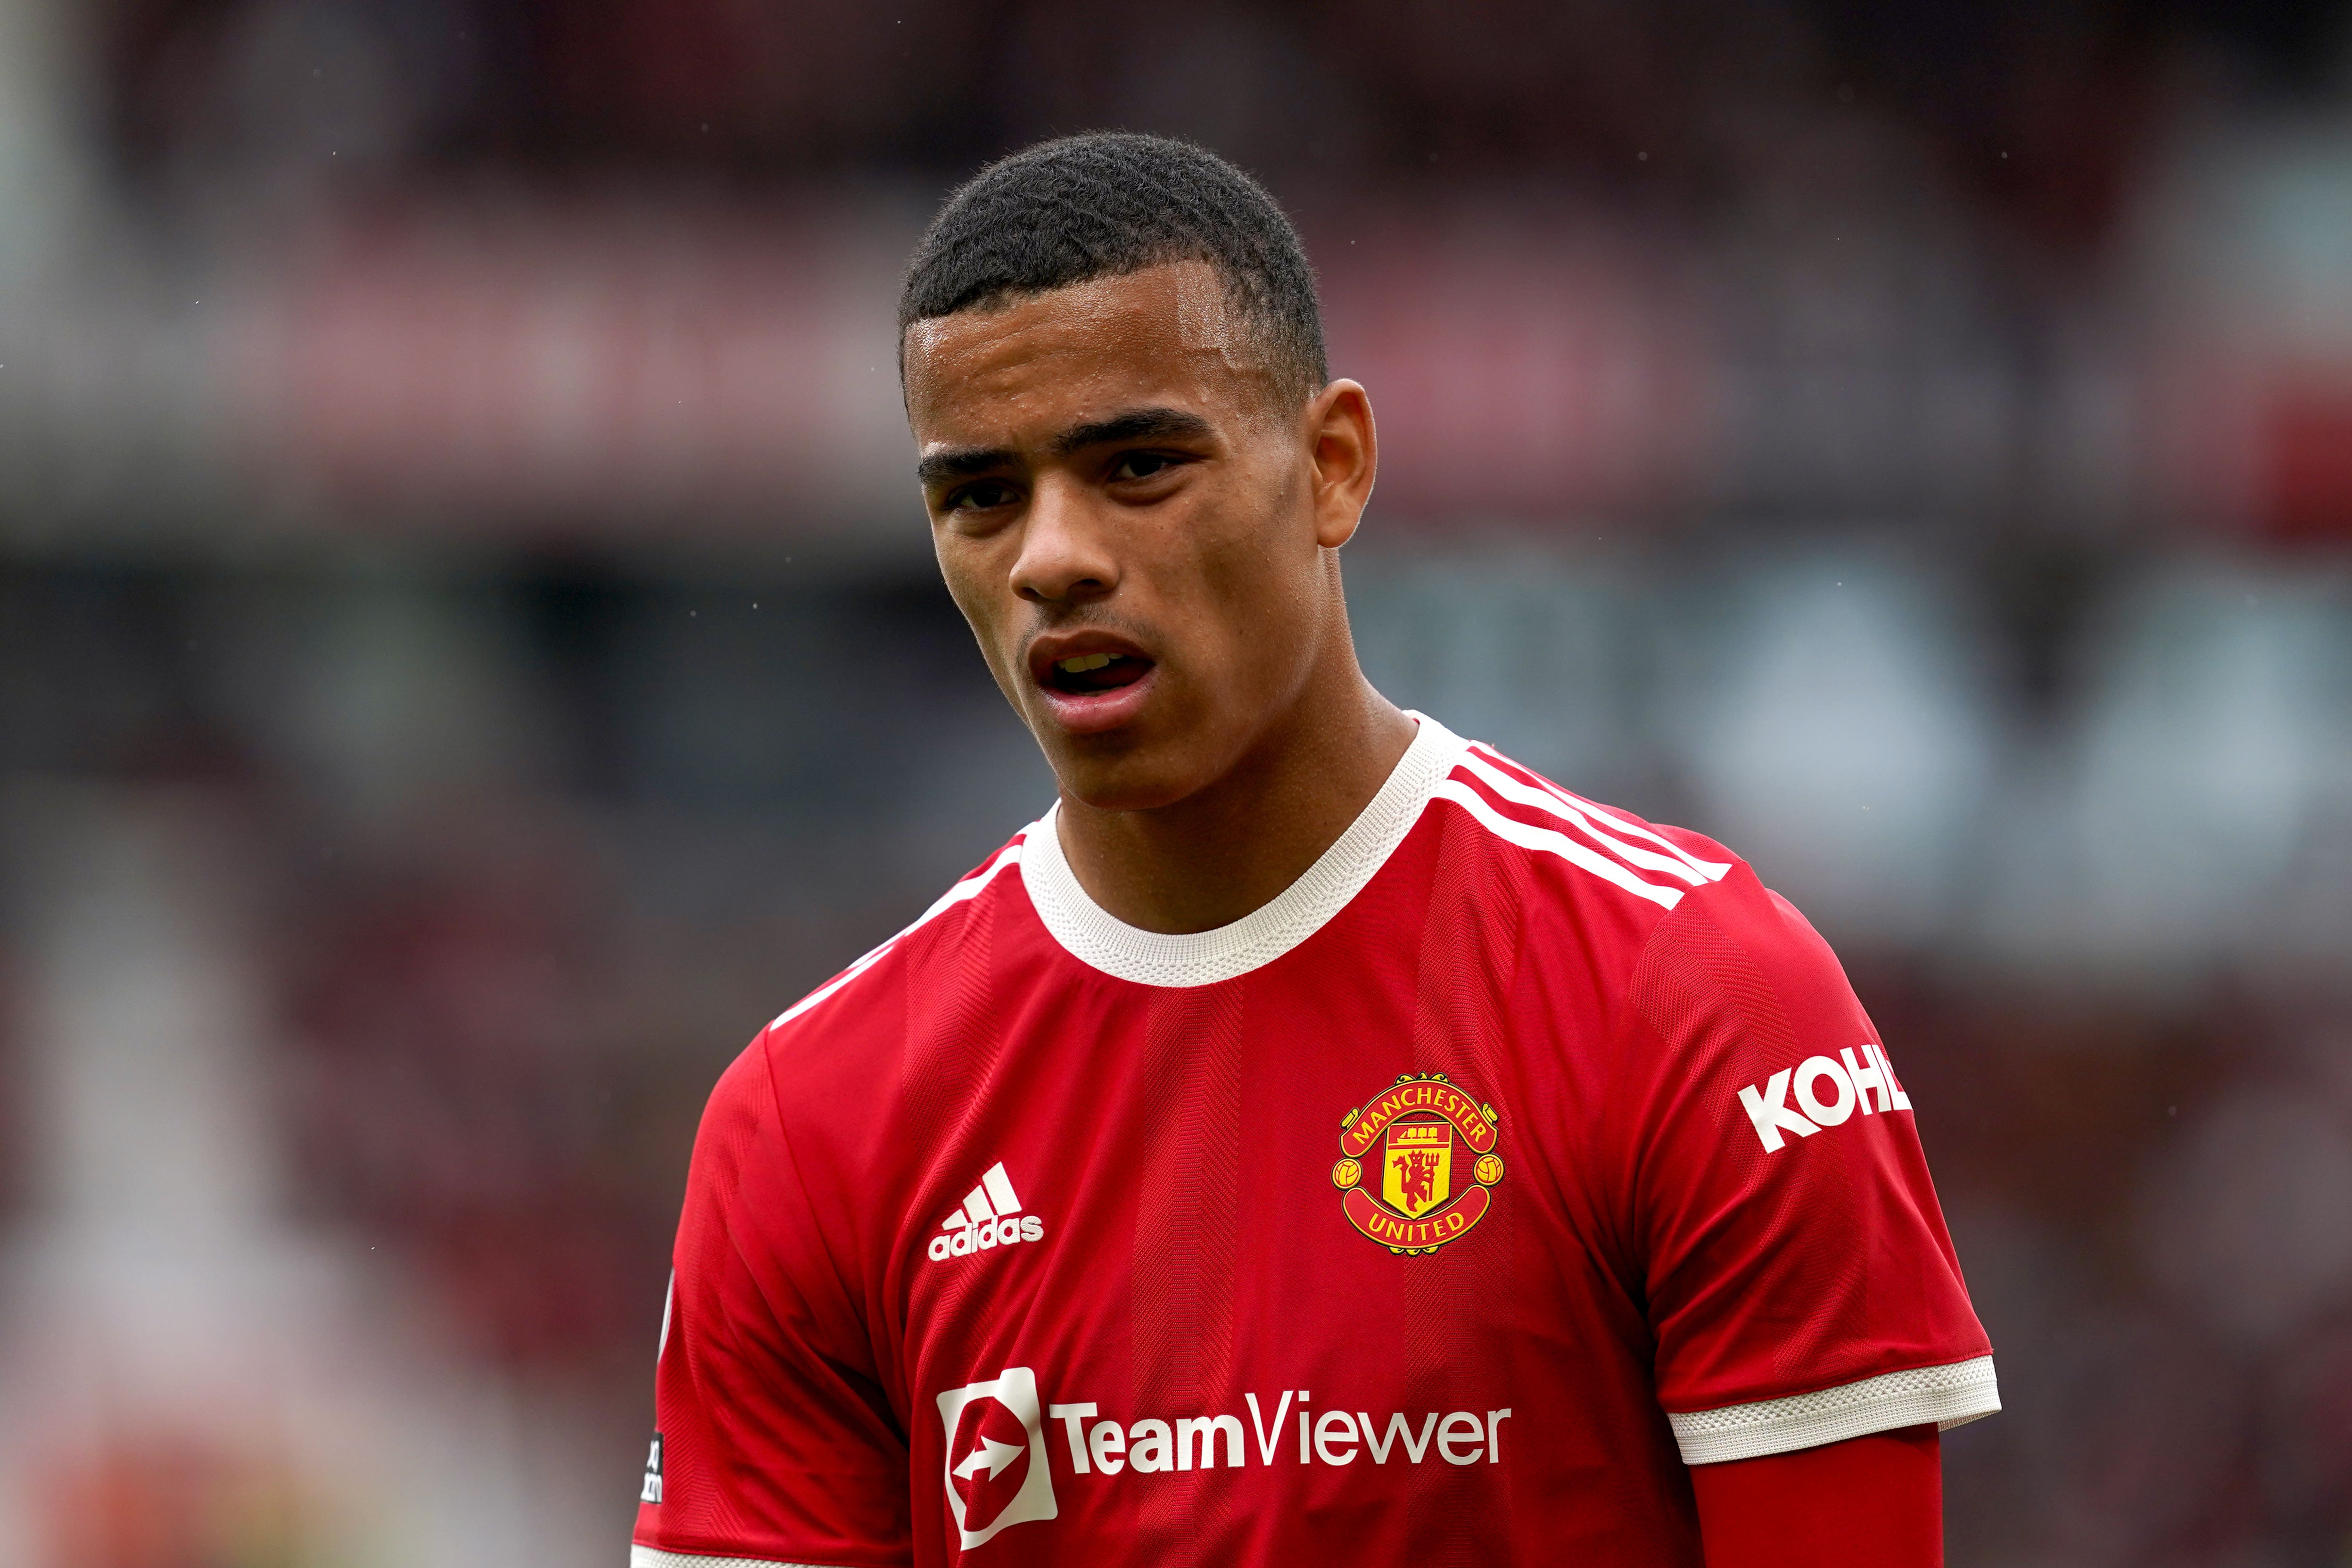 Mason Greenwood will have his Man Utd future decided imminently